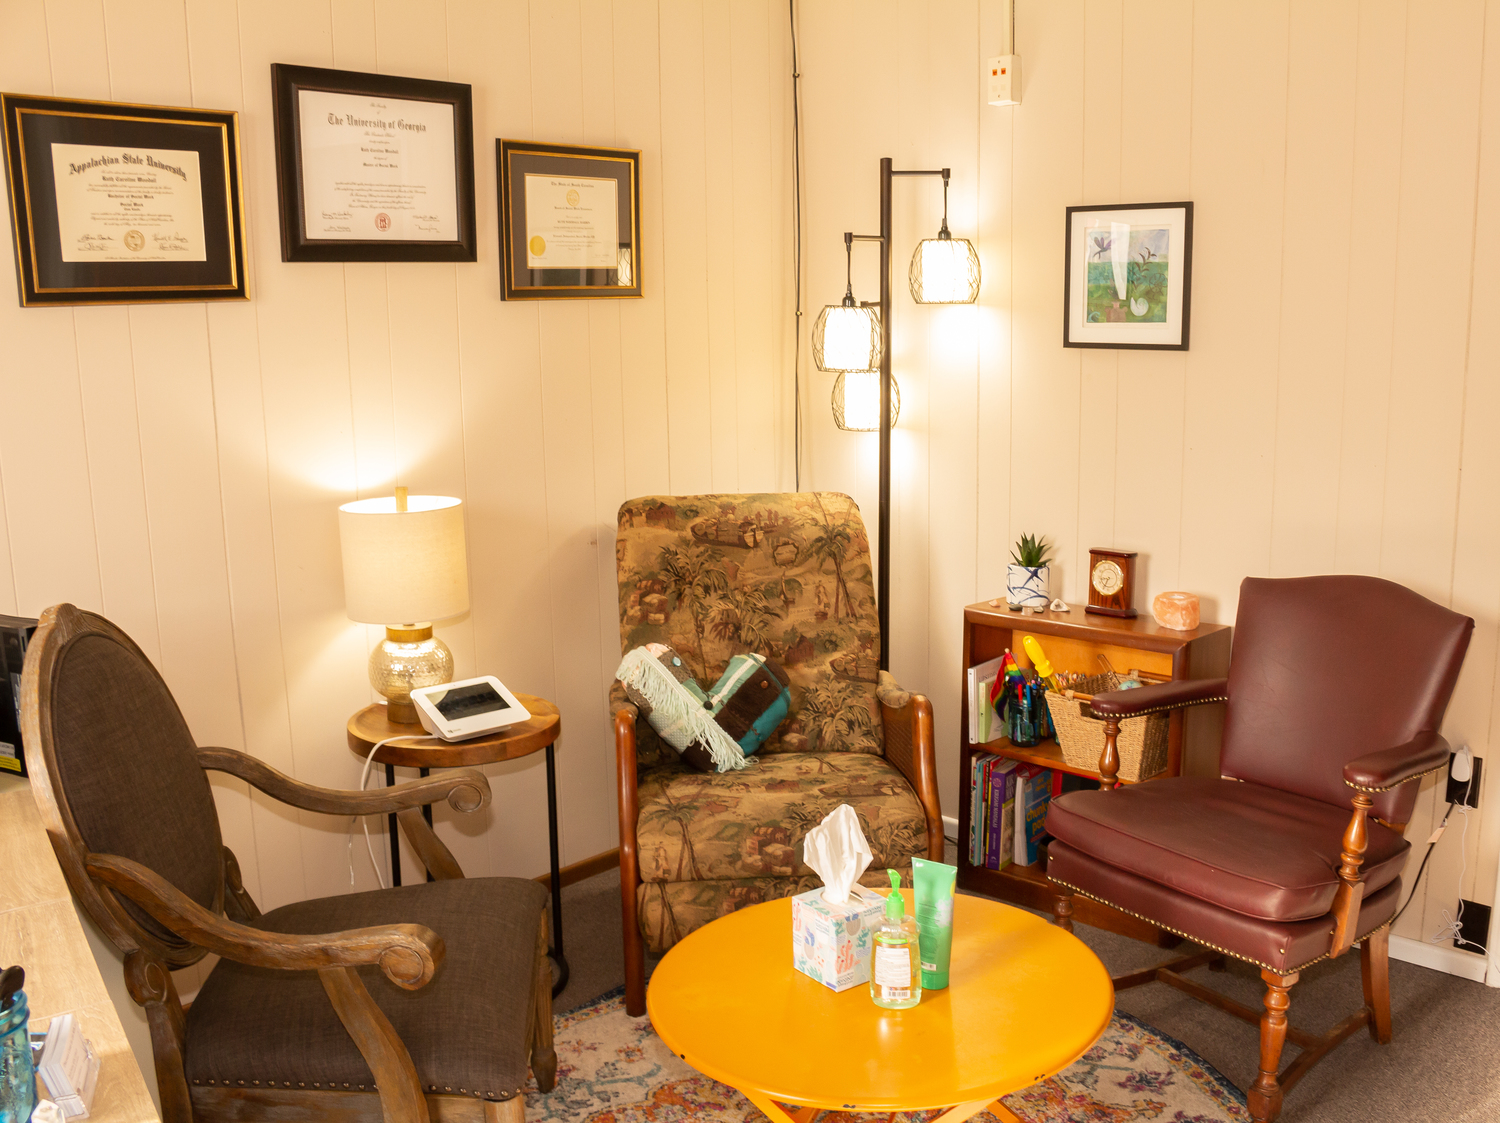 Gallery Photo of Ruth’s cozy, living room inspired office.